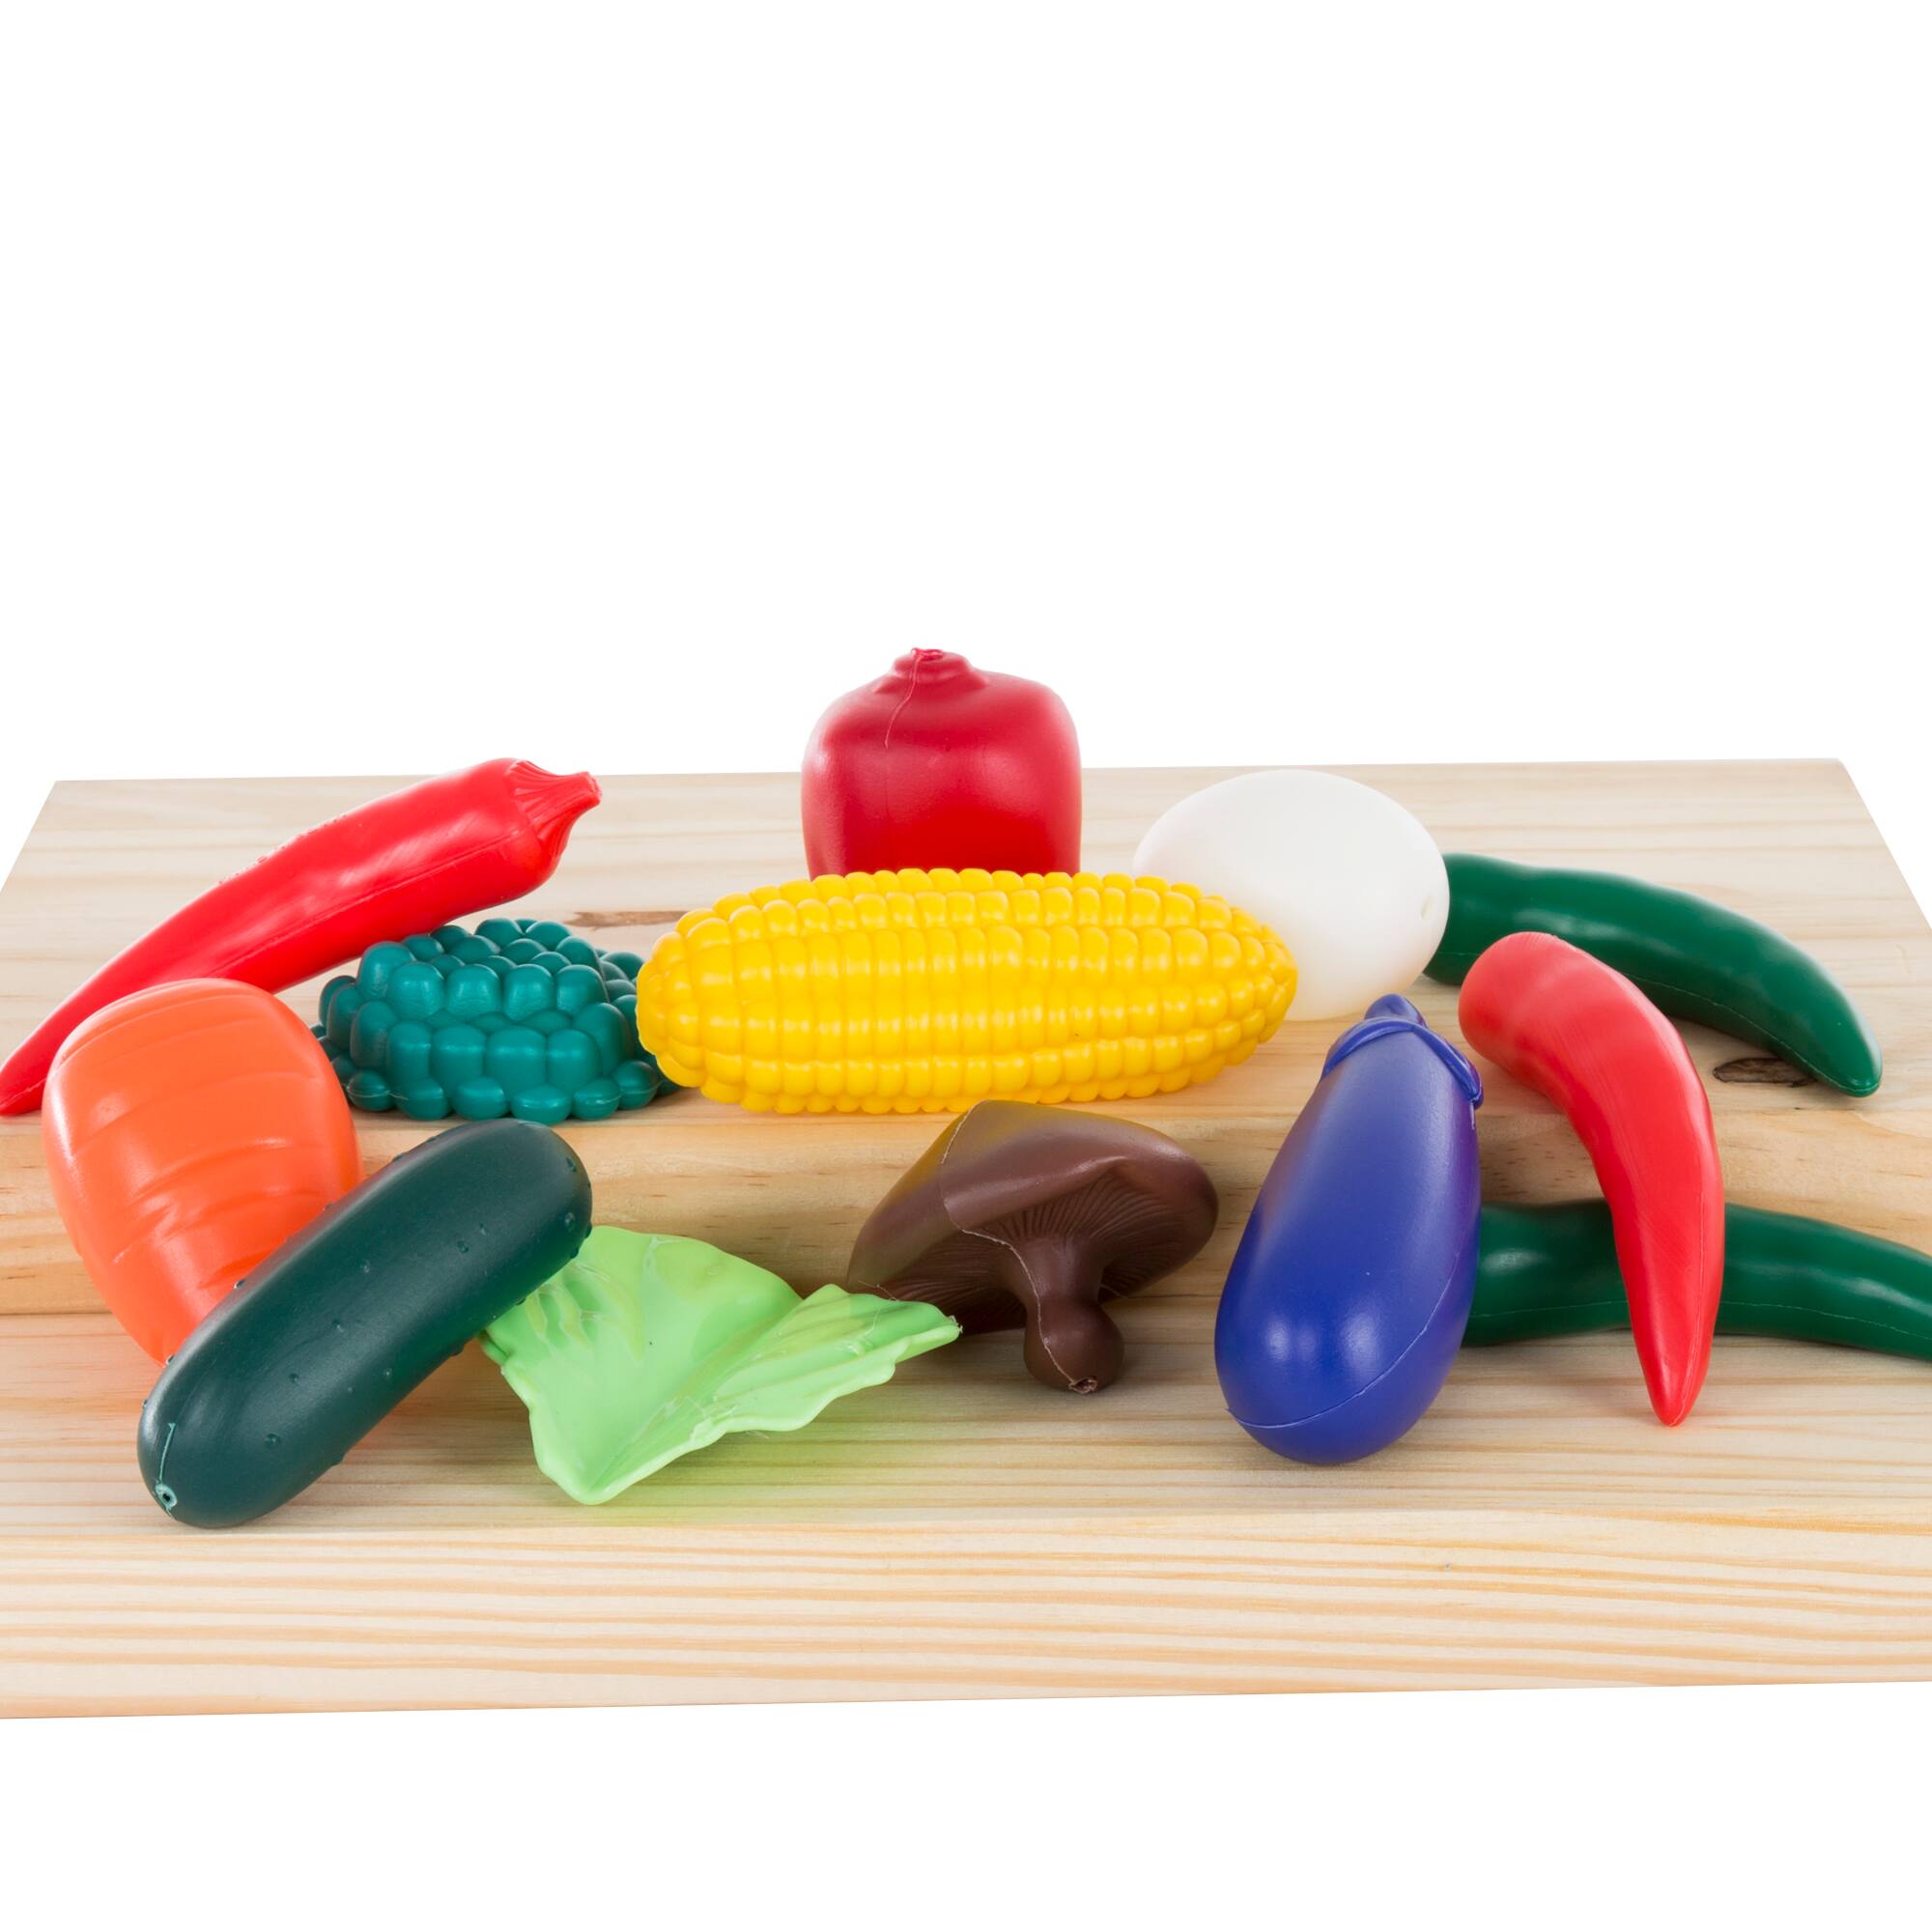 Toy Time Assorted Food Playset